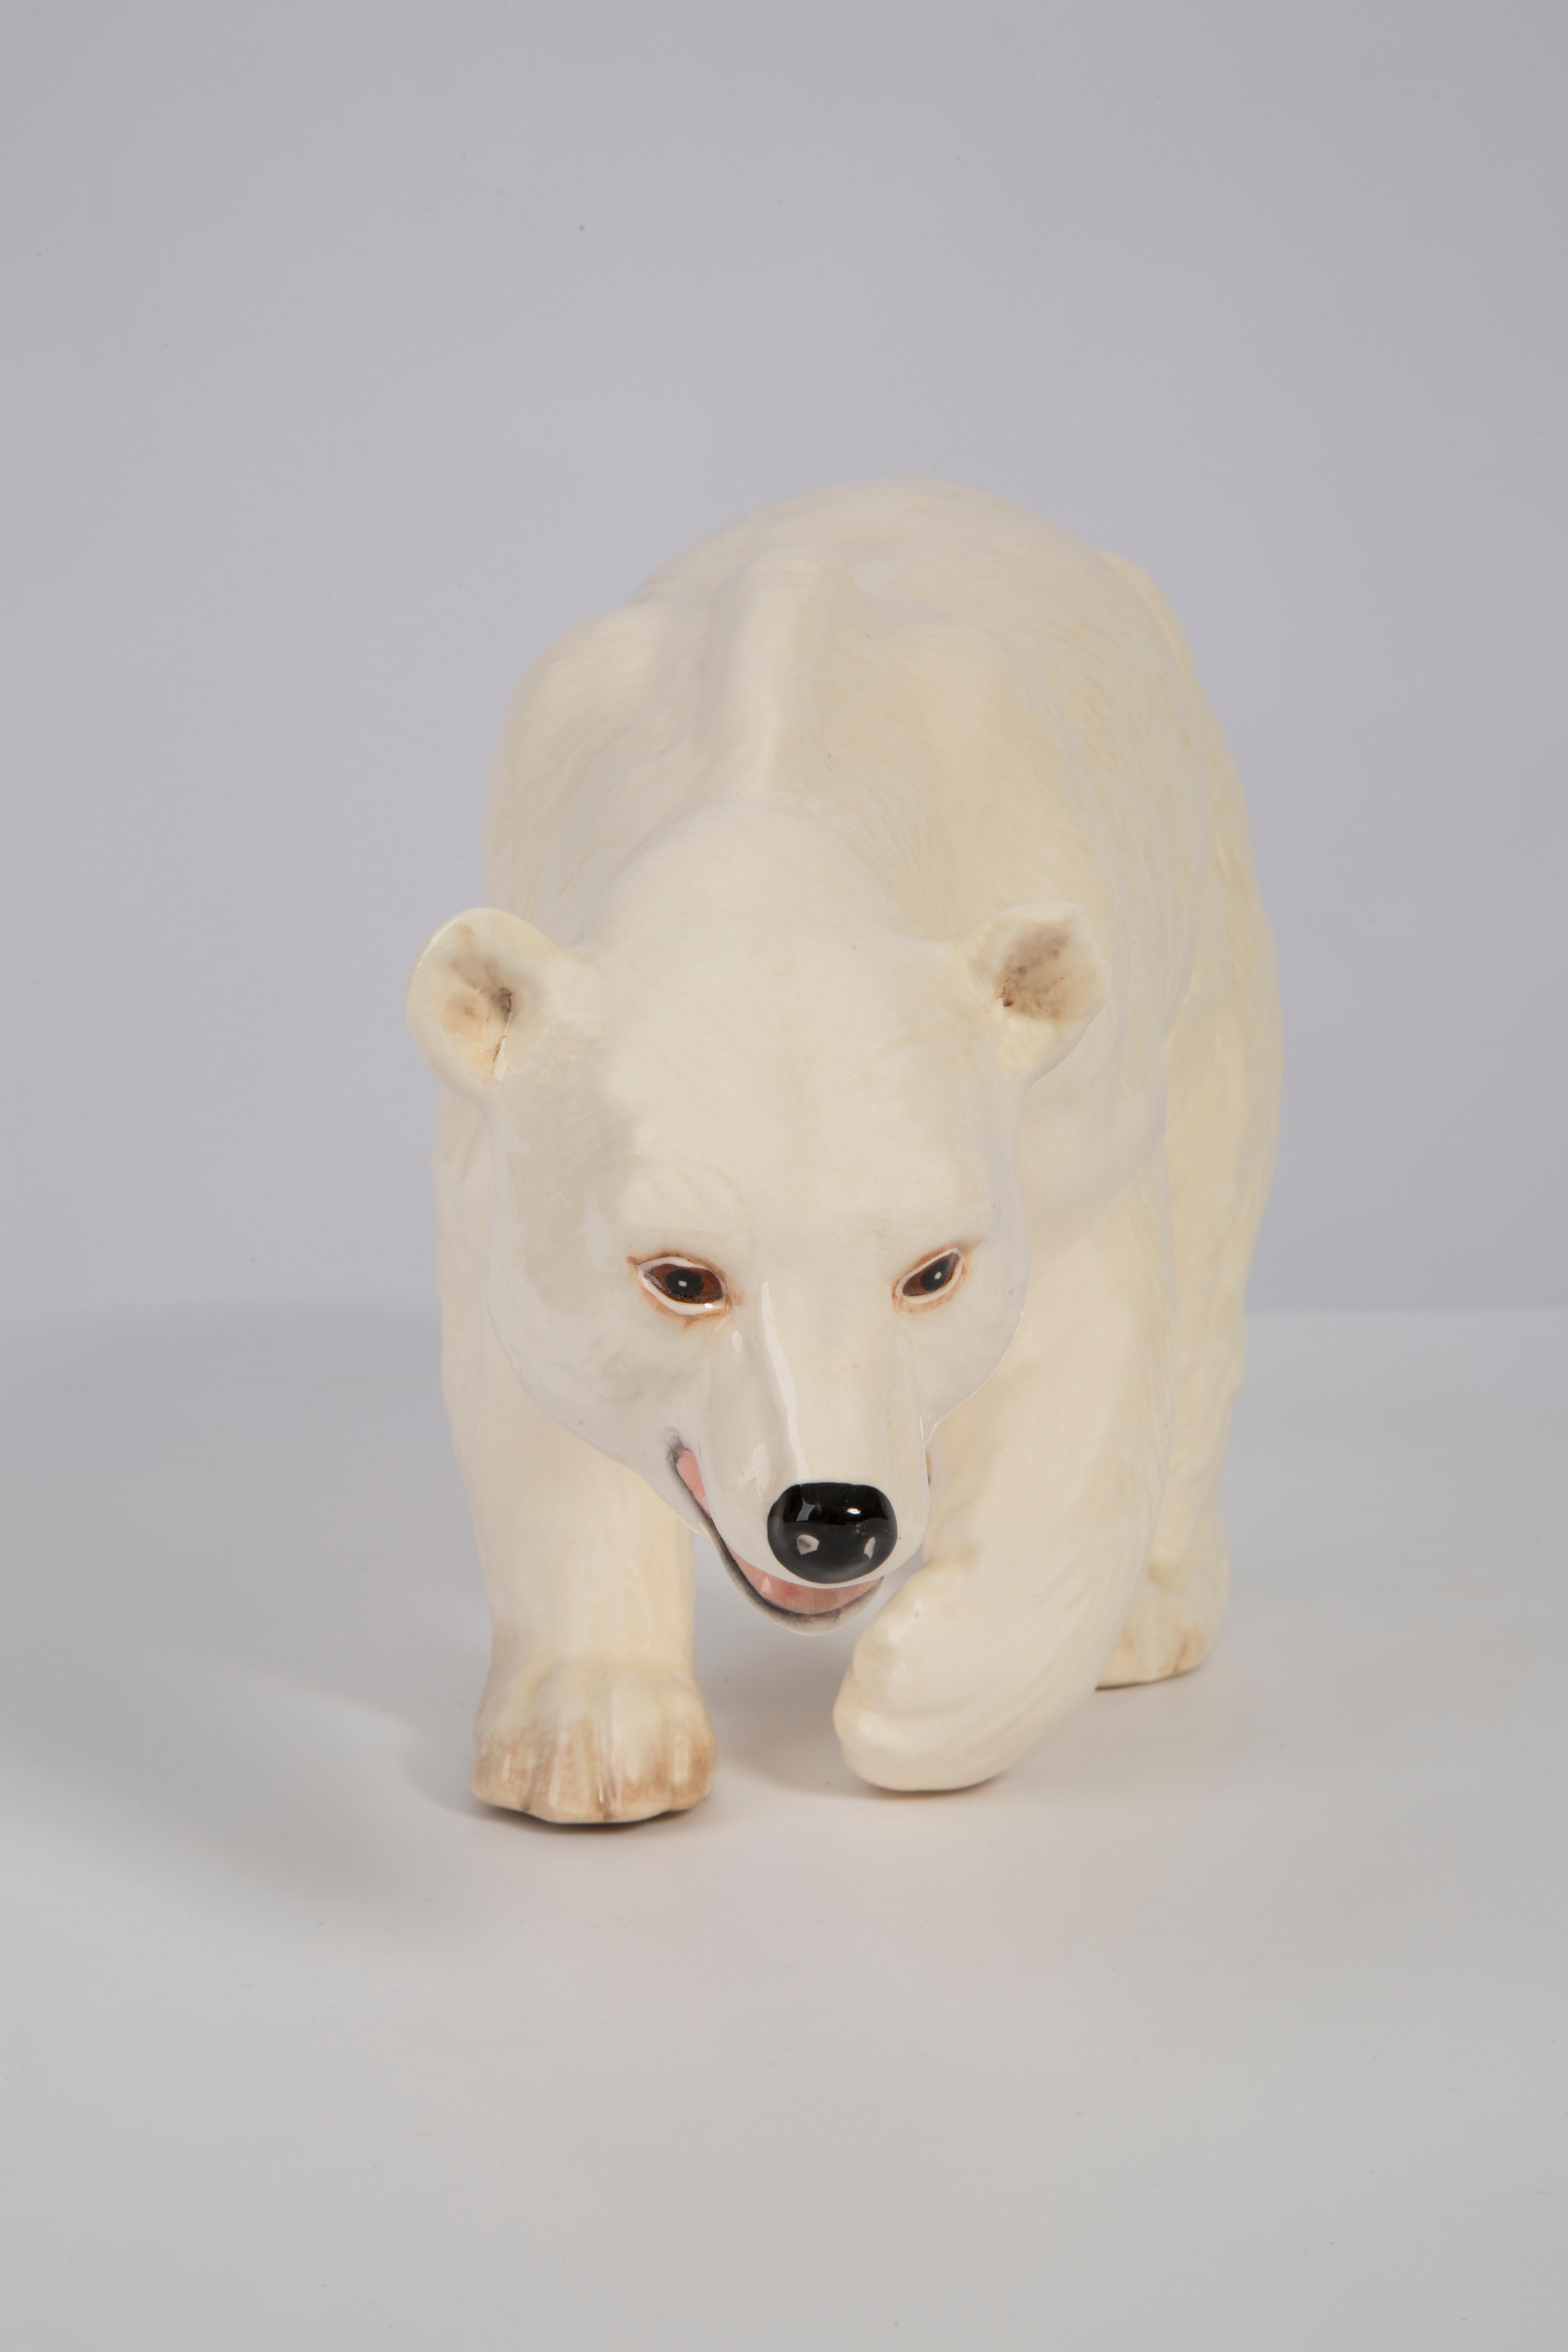 Painted ceramic, perfect condition. 
Beautiful and unique decorative sculpture. 
Polar bear was produced in 1960s in Germany.